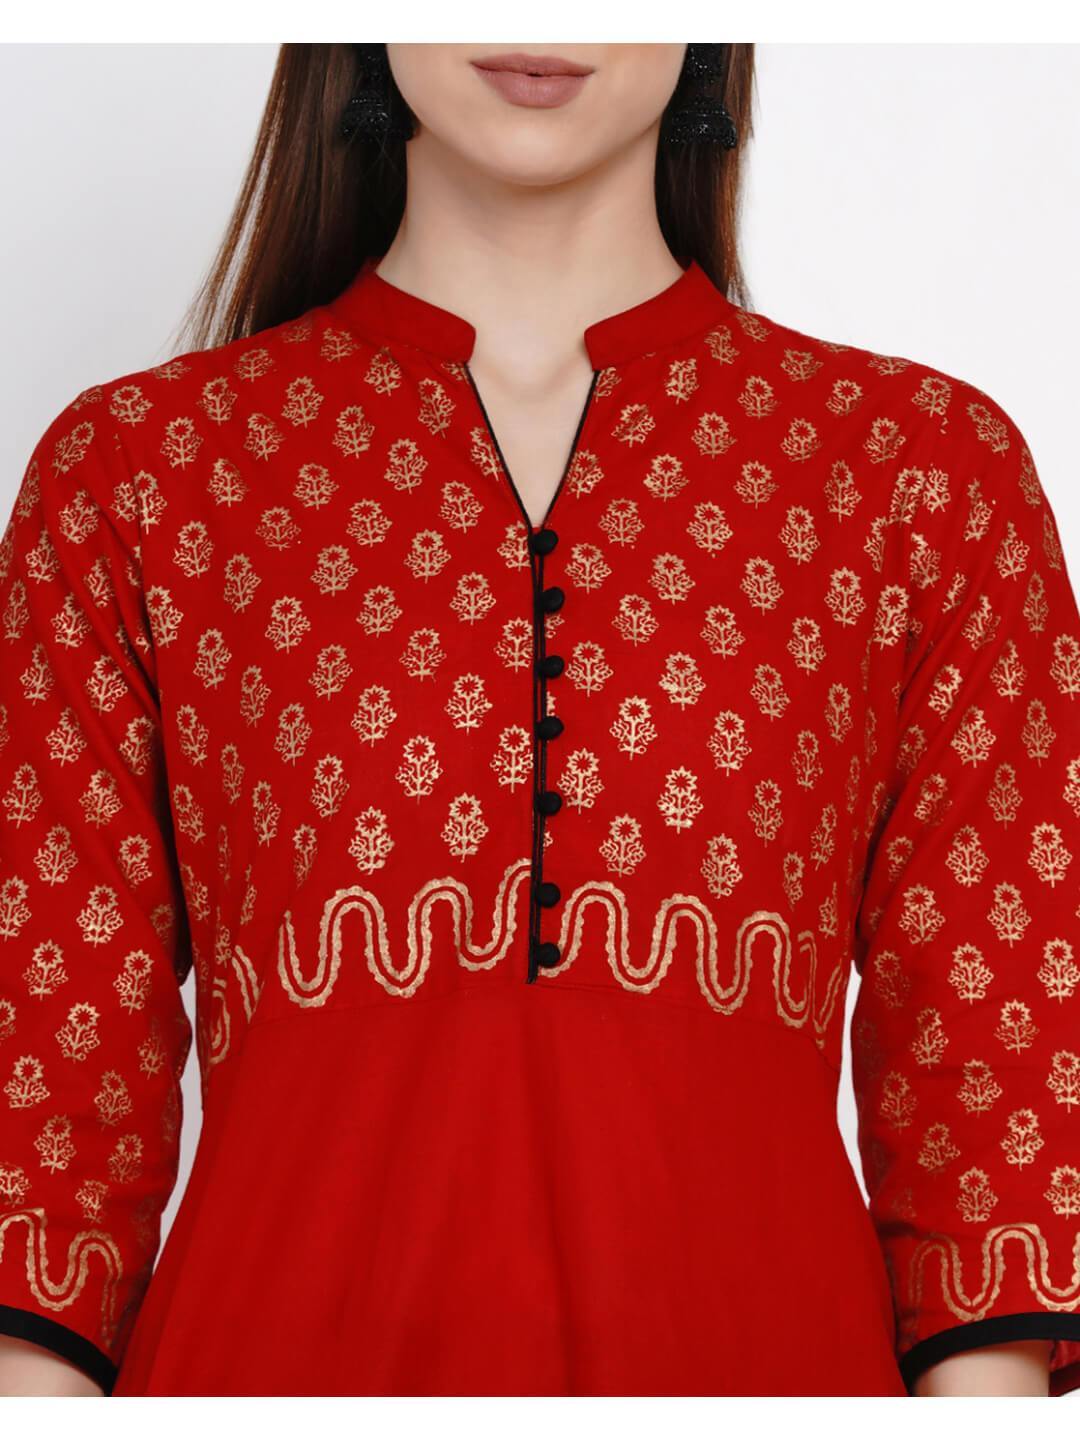 Golden and Red Anarkali with Ajrakh Hand Block Print - Inayat